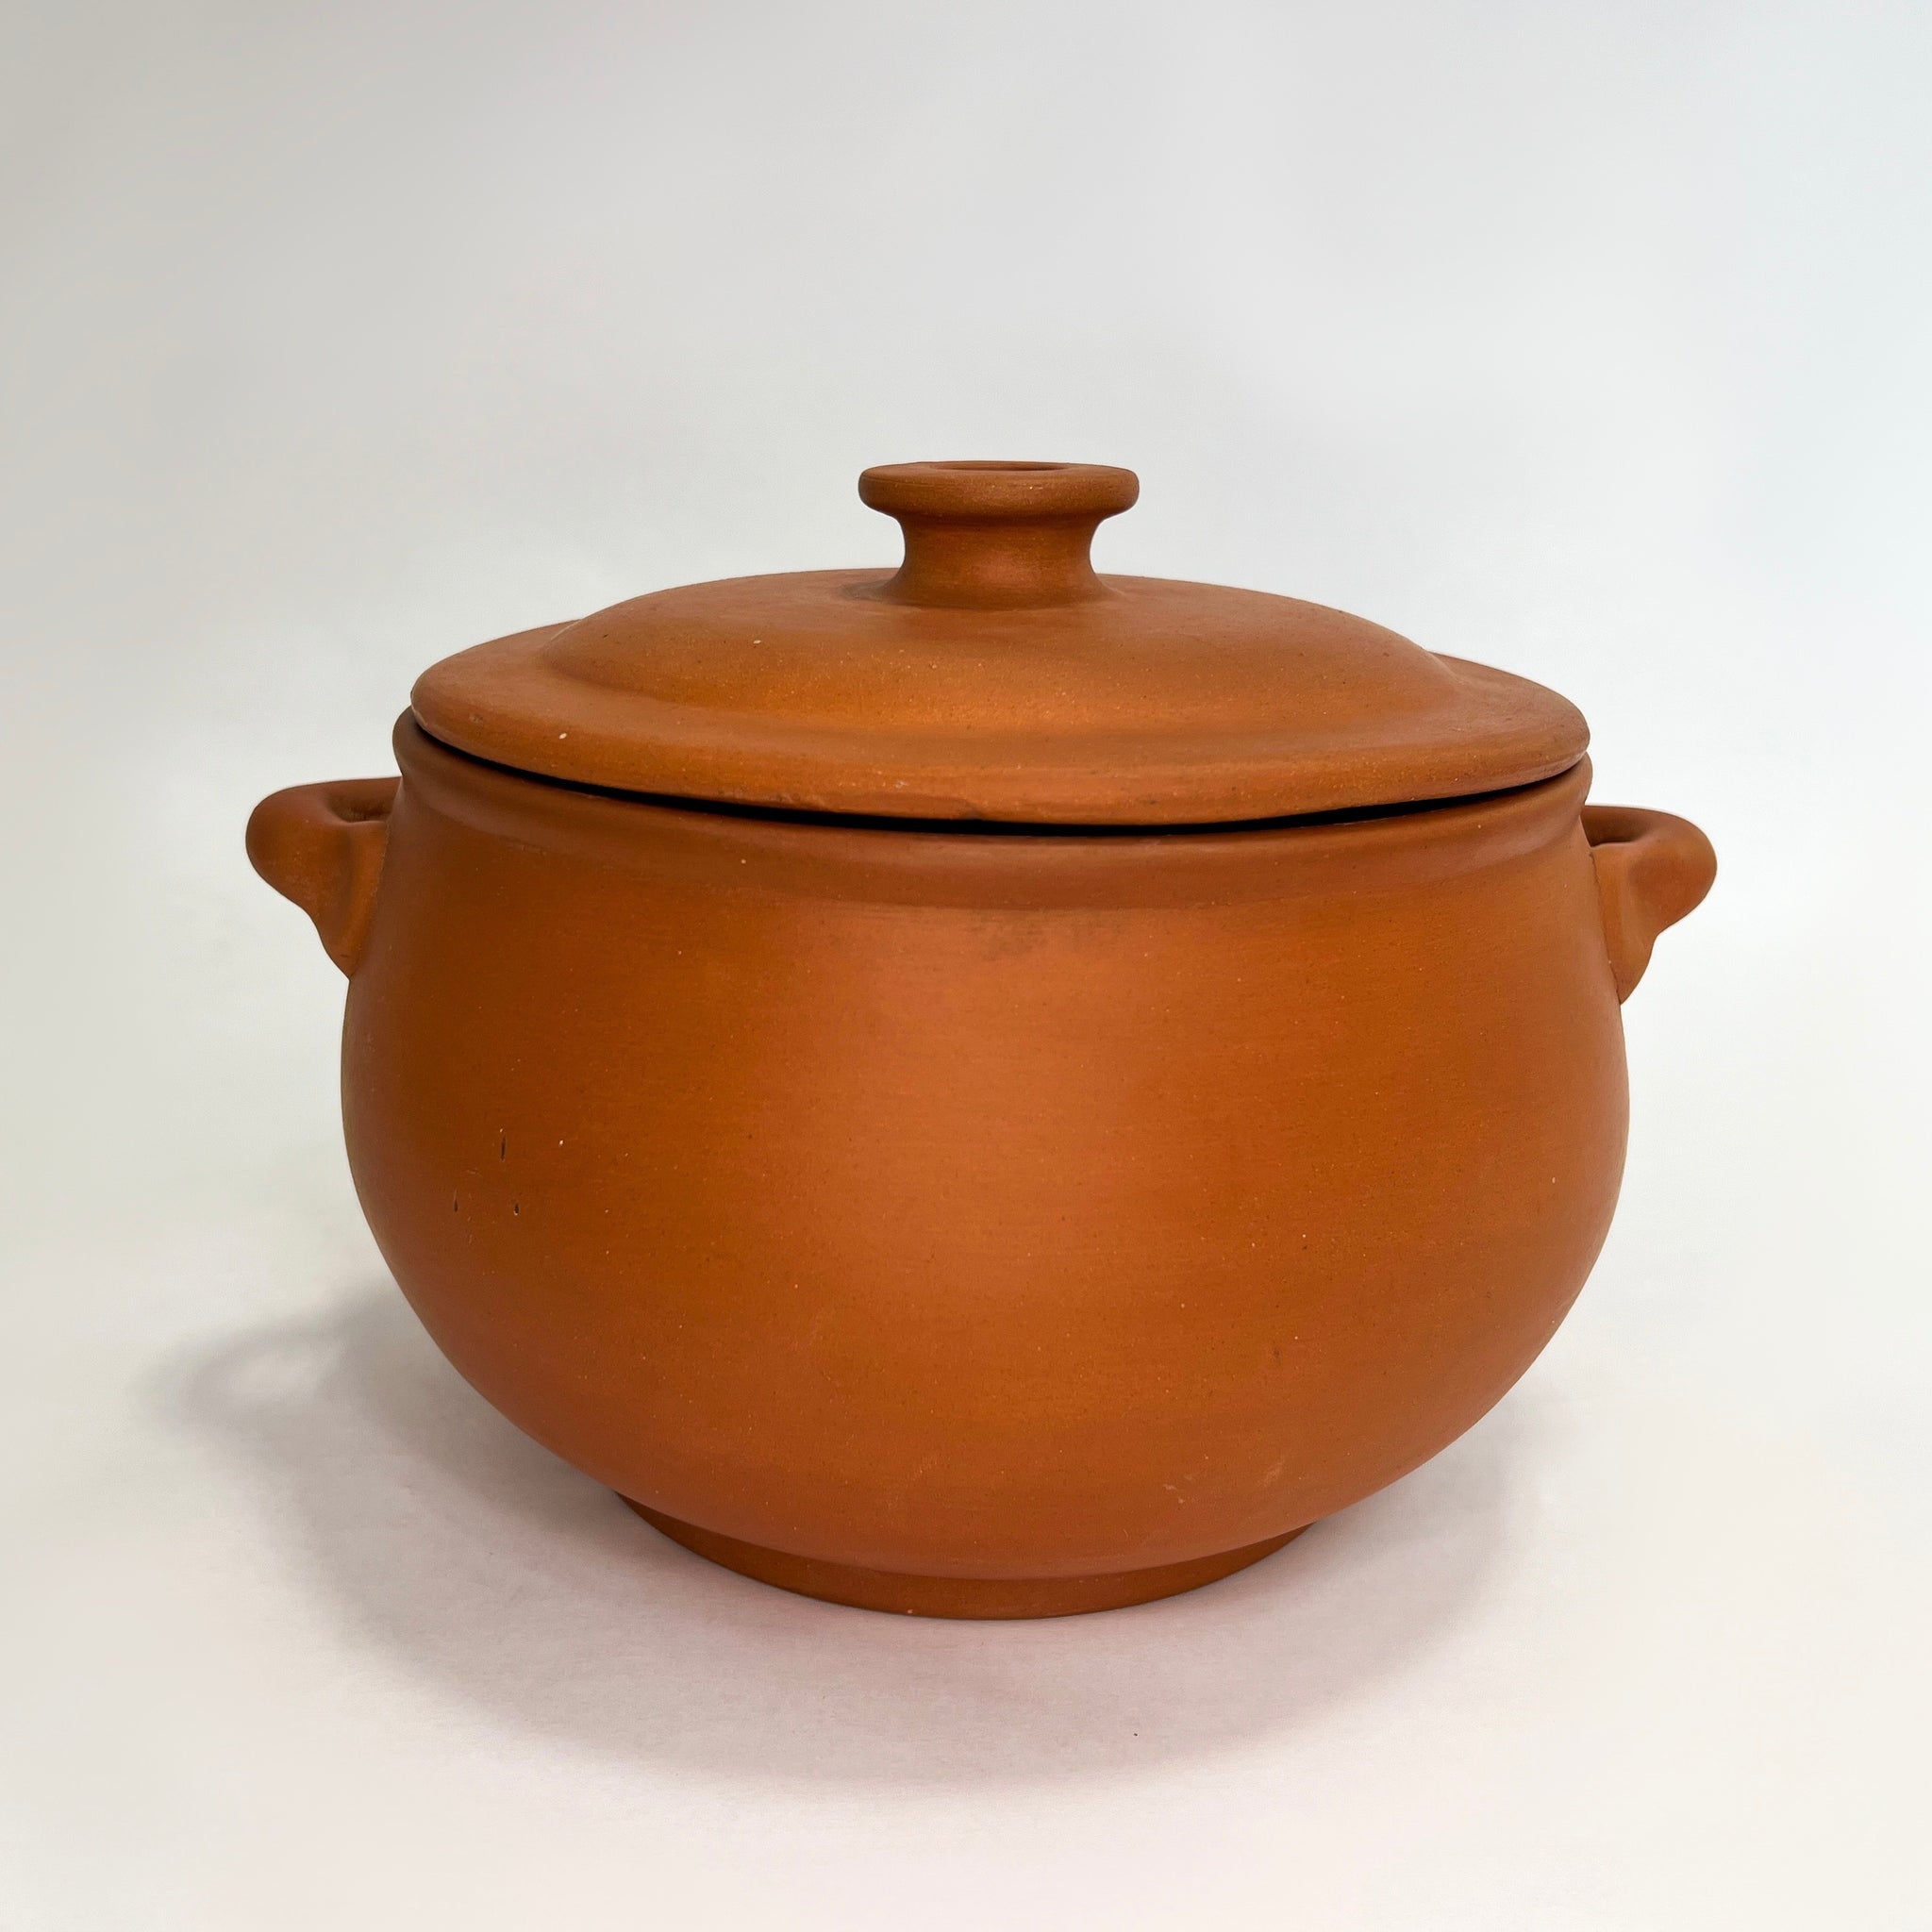 A Covered Stewpot: The Most Versatile Piece of Cookware You'll